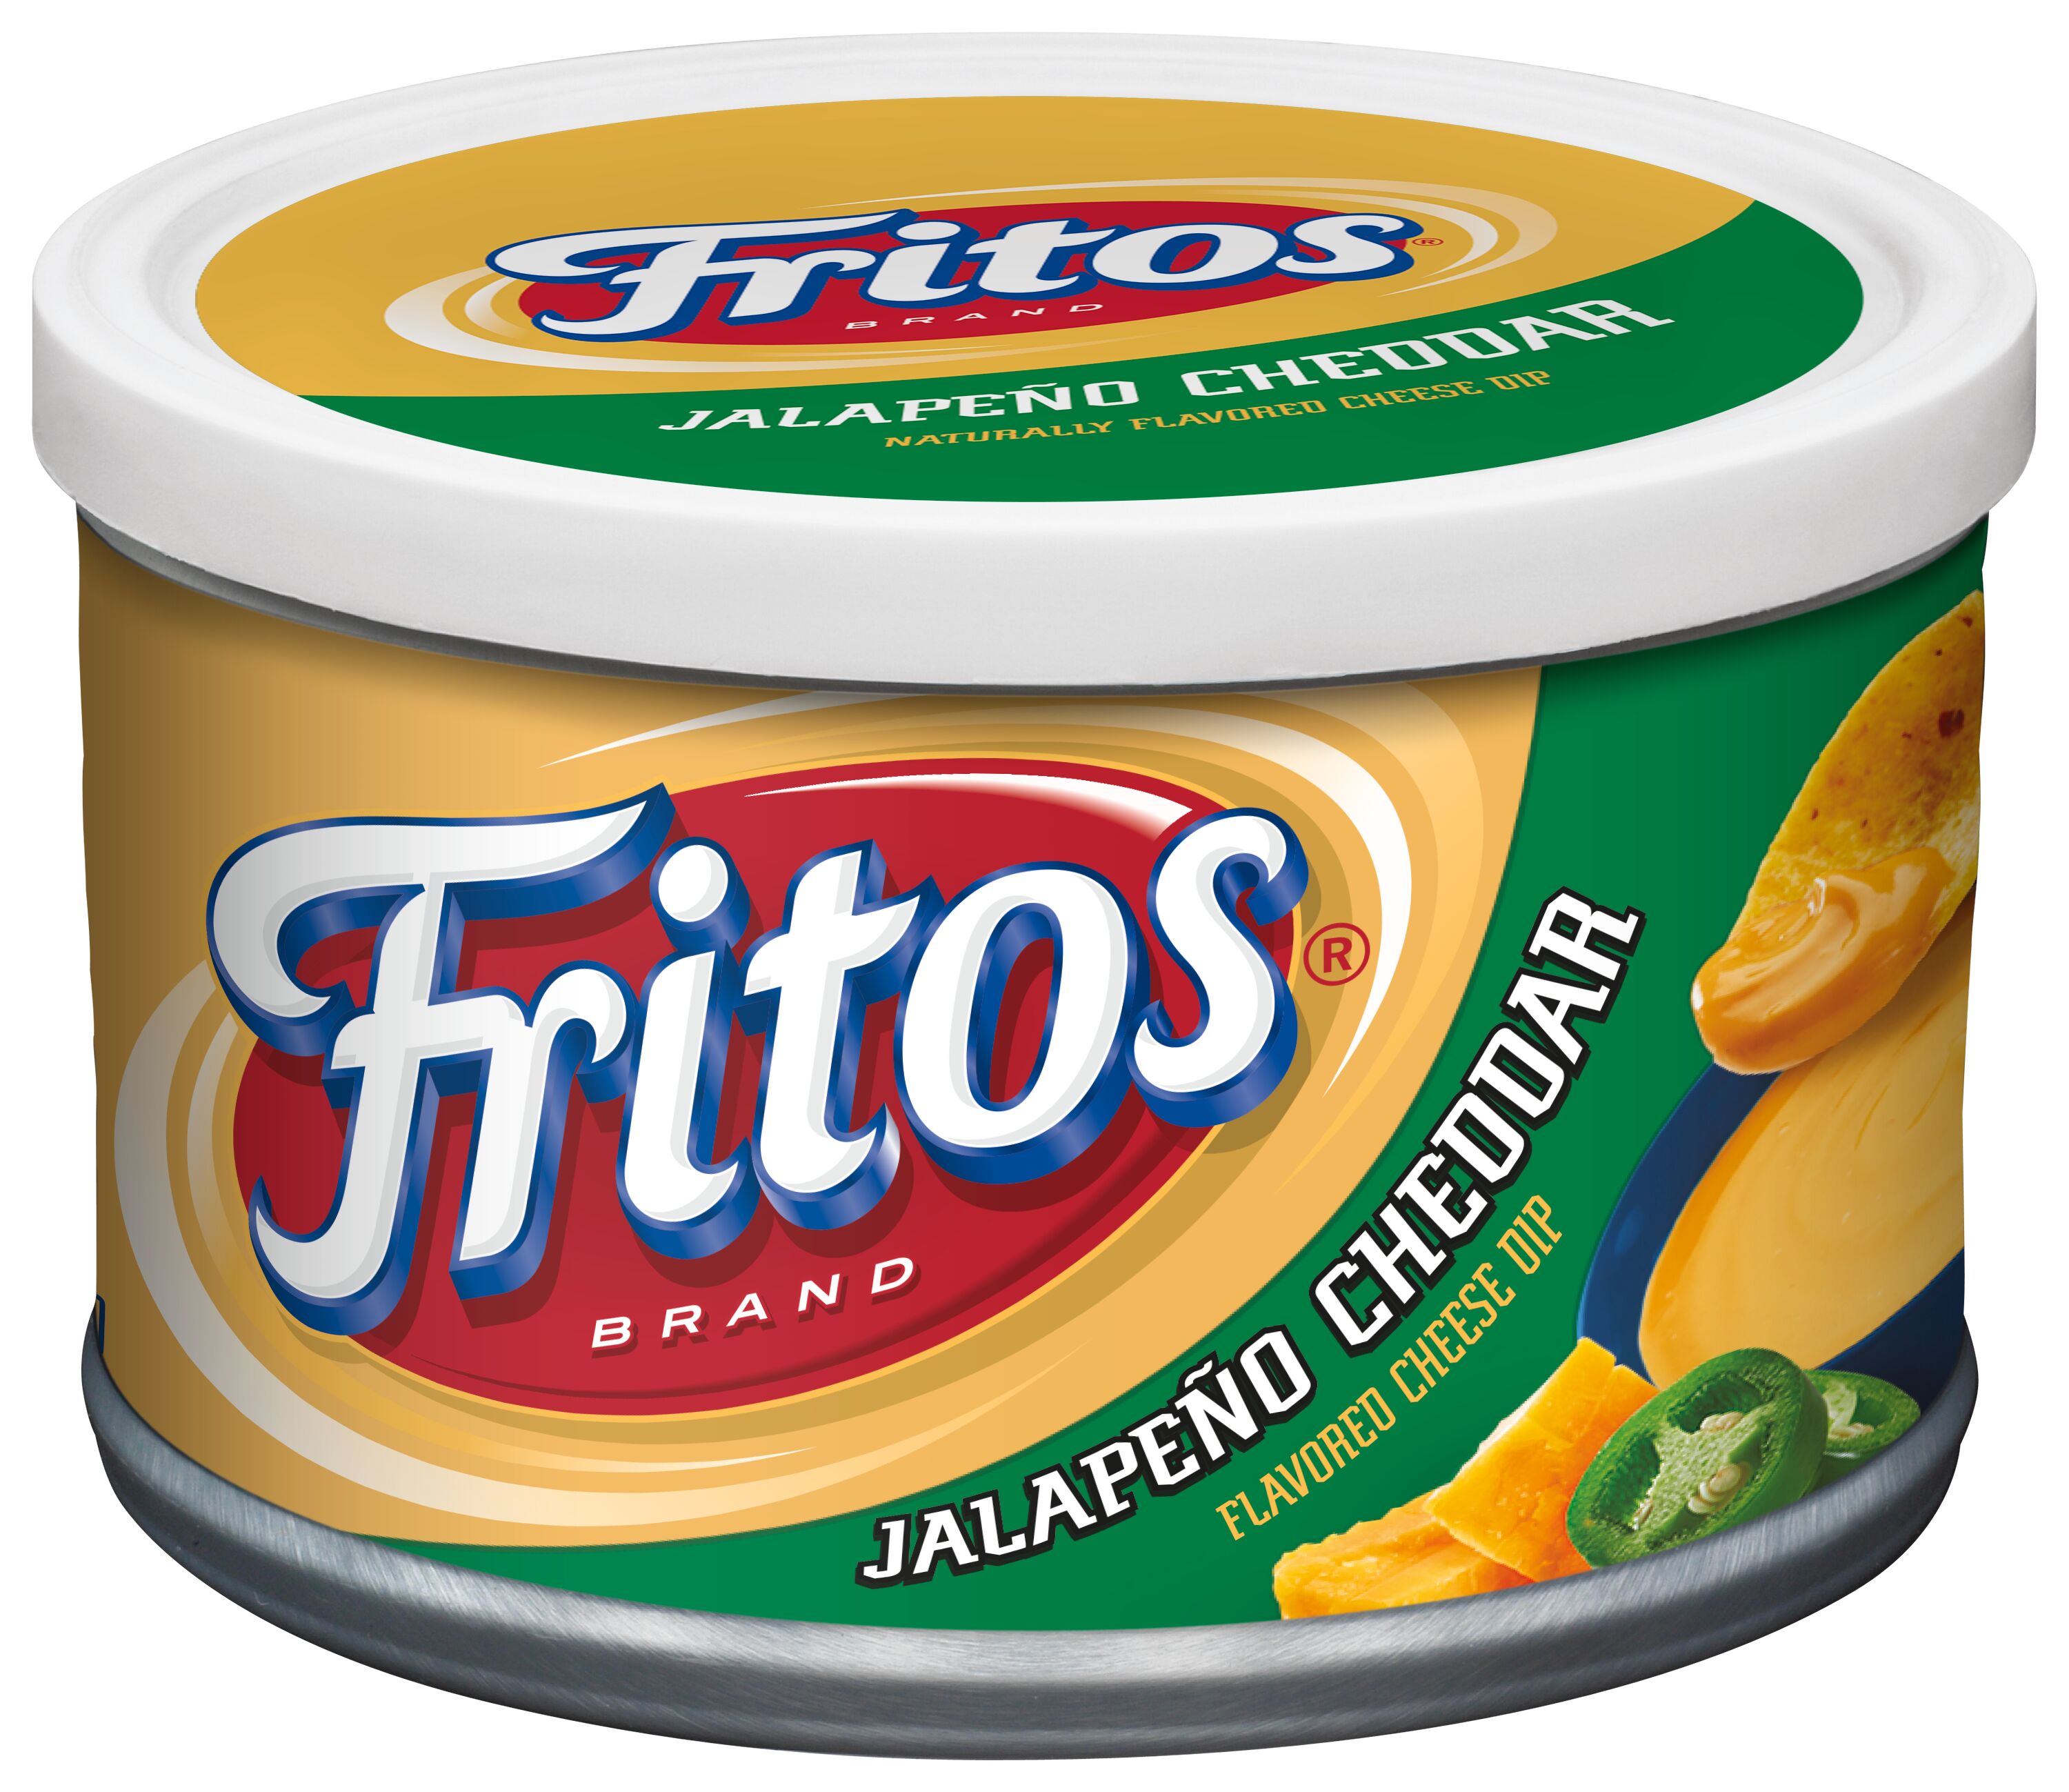 Fritos Jalapeno Cheddar Naturally Flavored Cheese Dip, Can 9 oz - image 1 of 6